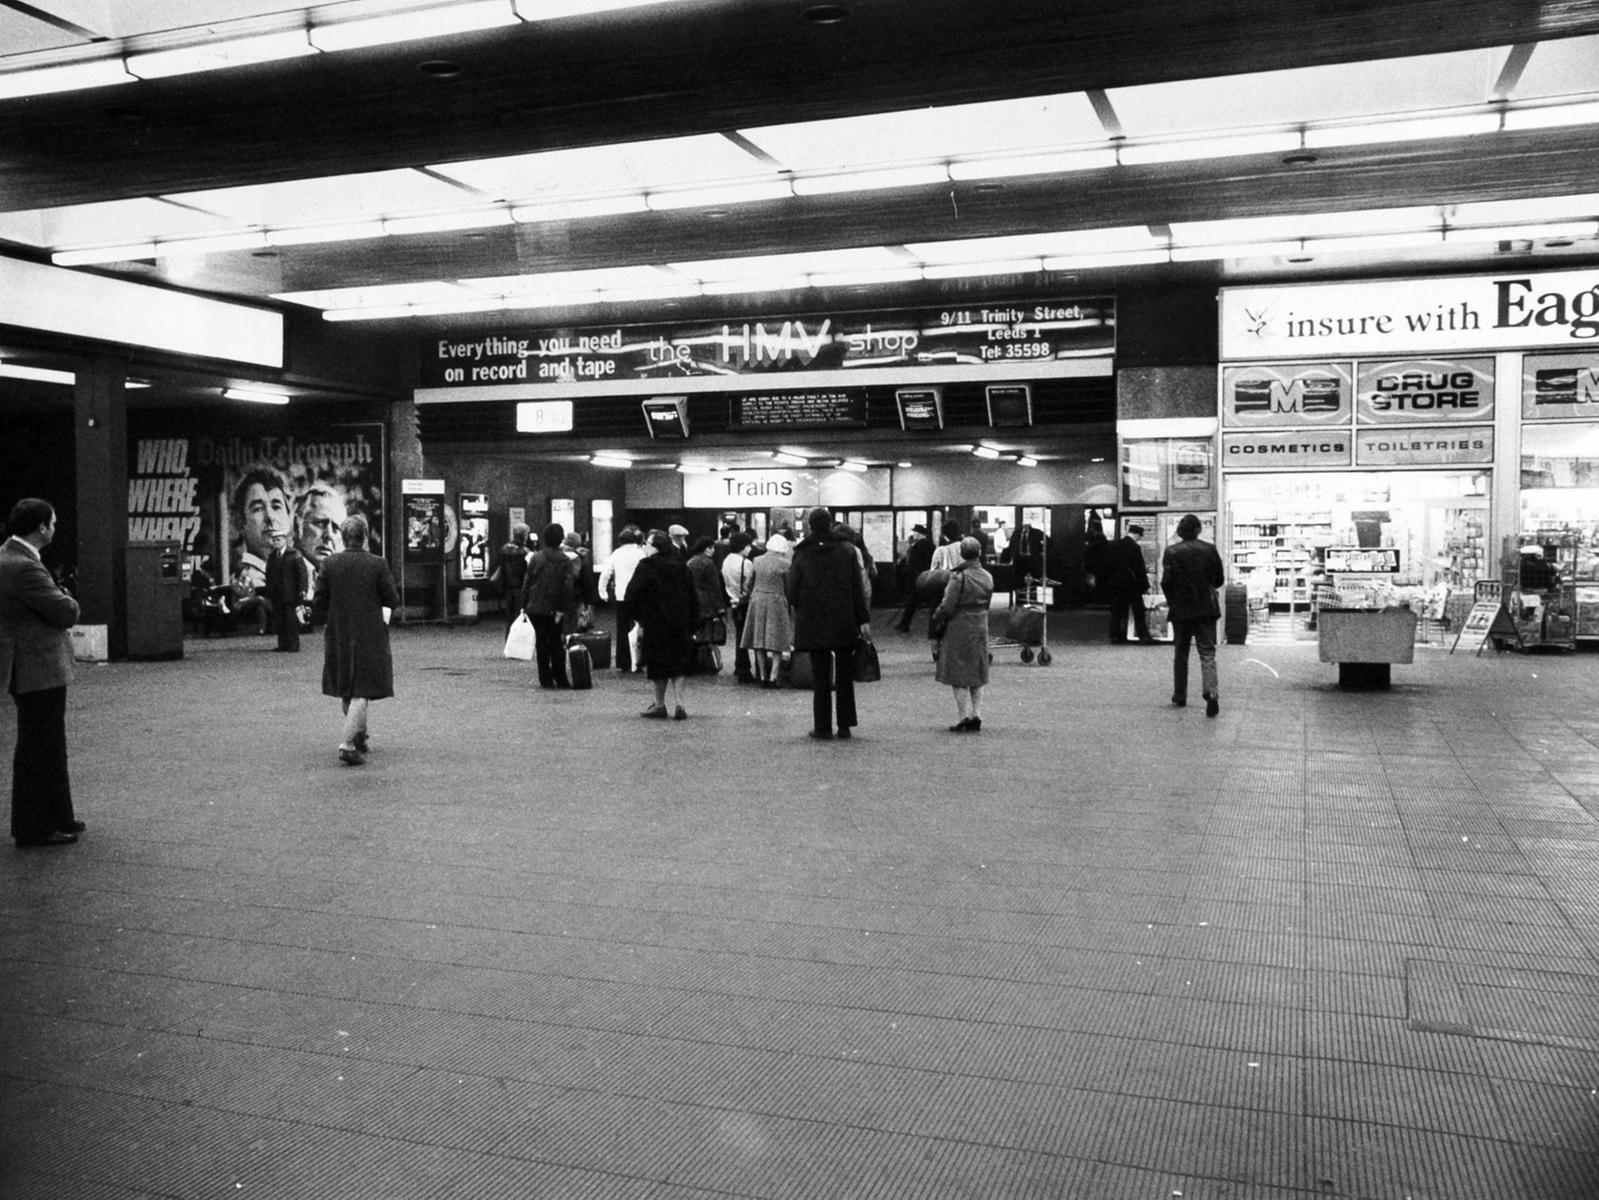 Some of the shops at Leeds City Station. Note the Daily Telegraph plackard showing Brian Clough and Peter Taylor.